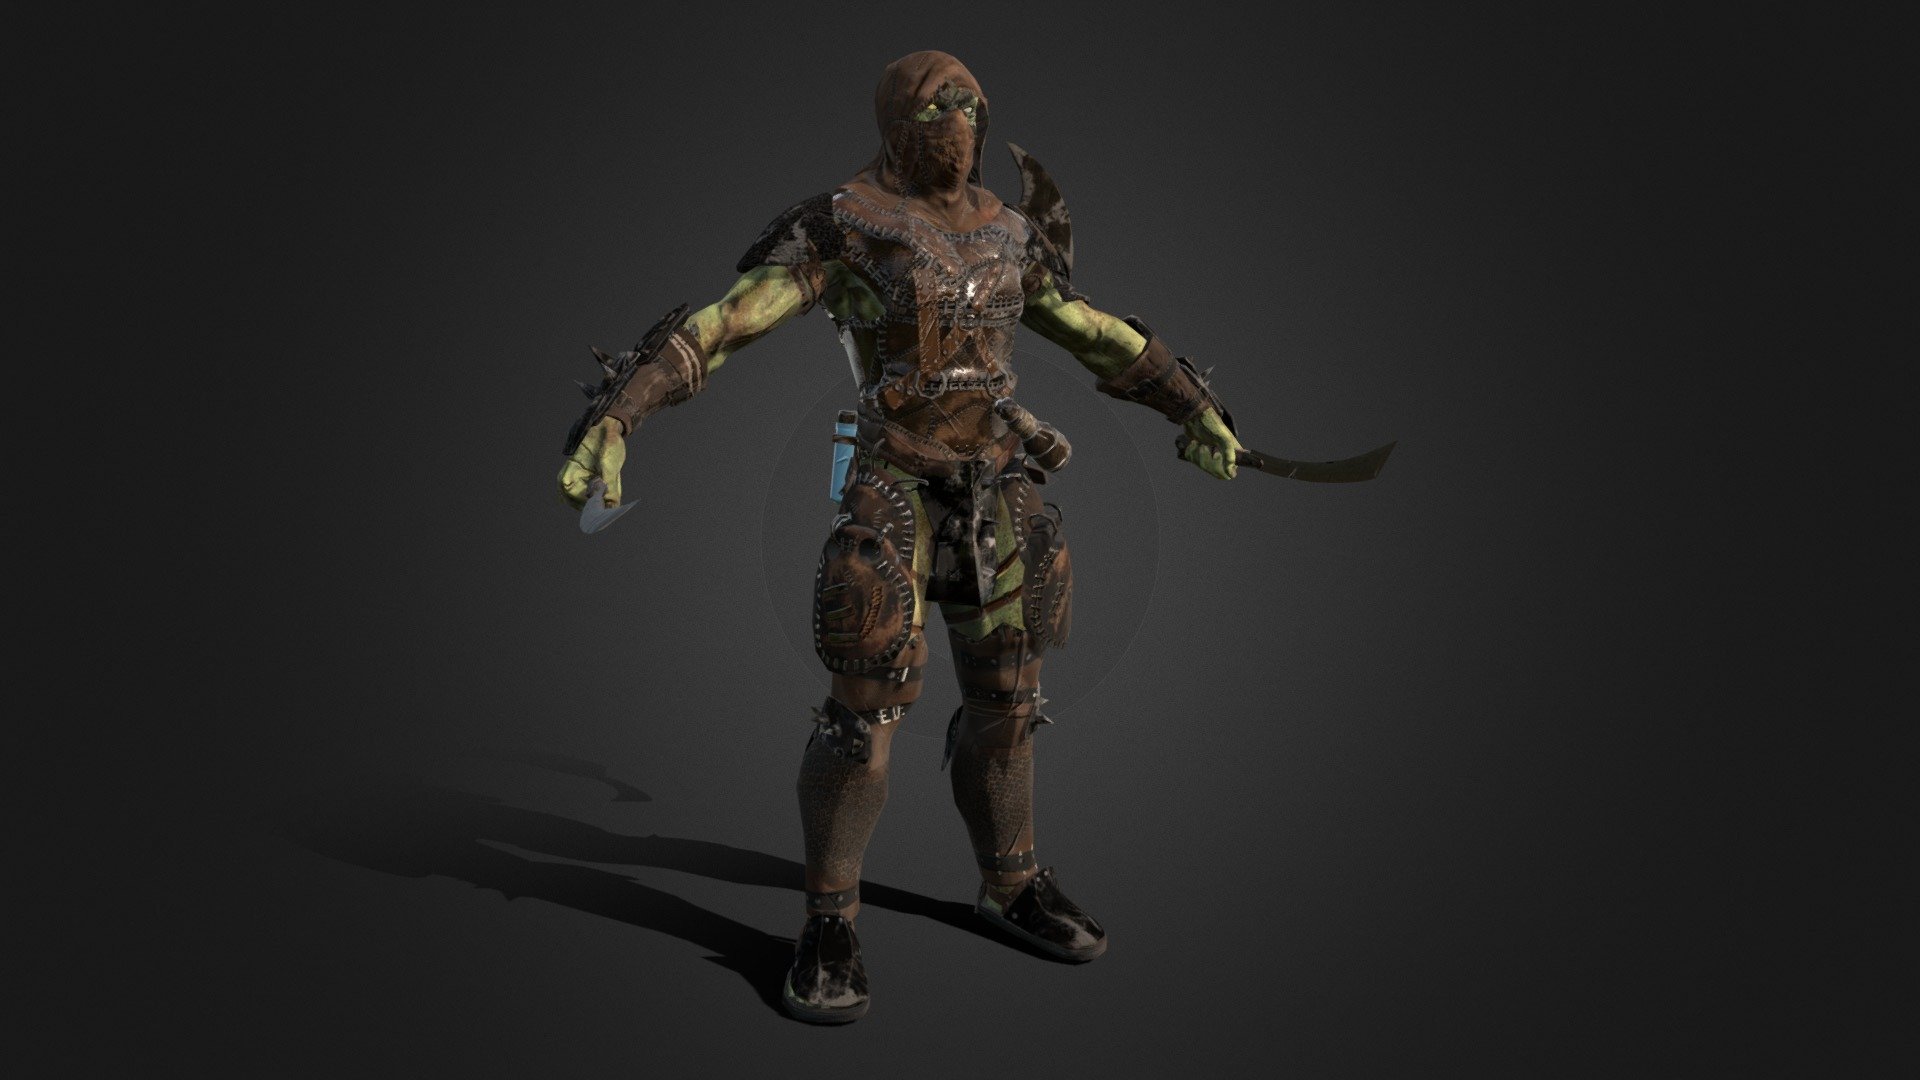 Low-poly model of the character Orc killer
Suitable for games of different genre: RPG, strategy, first-person shooter, etc.
In the archive, the basic mesh (fbh and maya)

Textures of different parts of armor 2048x2048
Weapon 2048x2048
Body 4096x4096
If desired, the texture can be compressed to 1024x1024 without much loss of quality

In the model it is desirable to use a shader with a two-sided display of polygons.

The model contains 50 animations
atack (x26)
walking (x3)
running (x3)
quiet step (x4)
Straight (x2)
bounce
idle (x5)
death (x4)
dodge
getting hit
steps backwards
steps bent down

faces 10567
verts 13087
tris 21115 - Orc assasin - Buy Royalty Free 3D model by dremorn 3d model